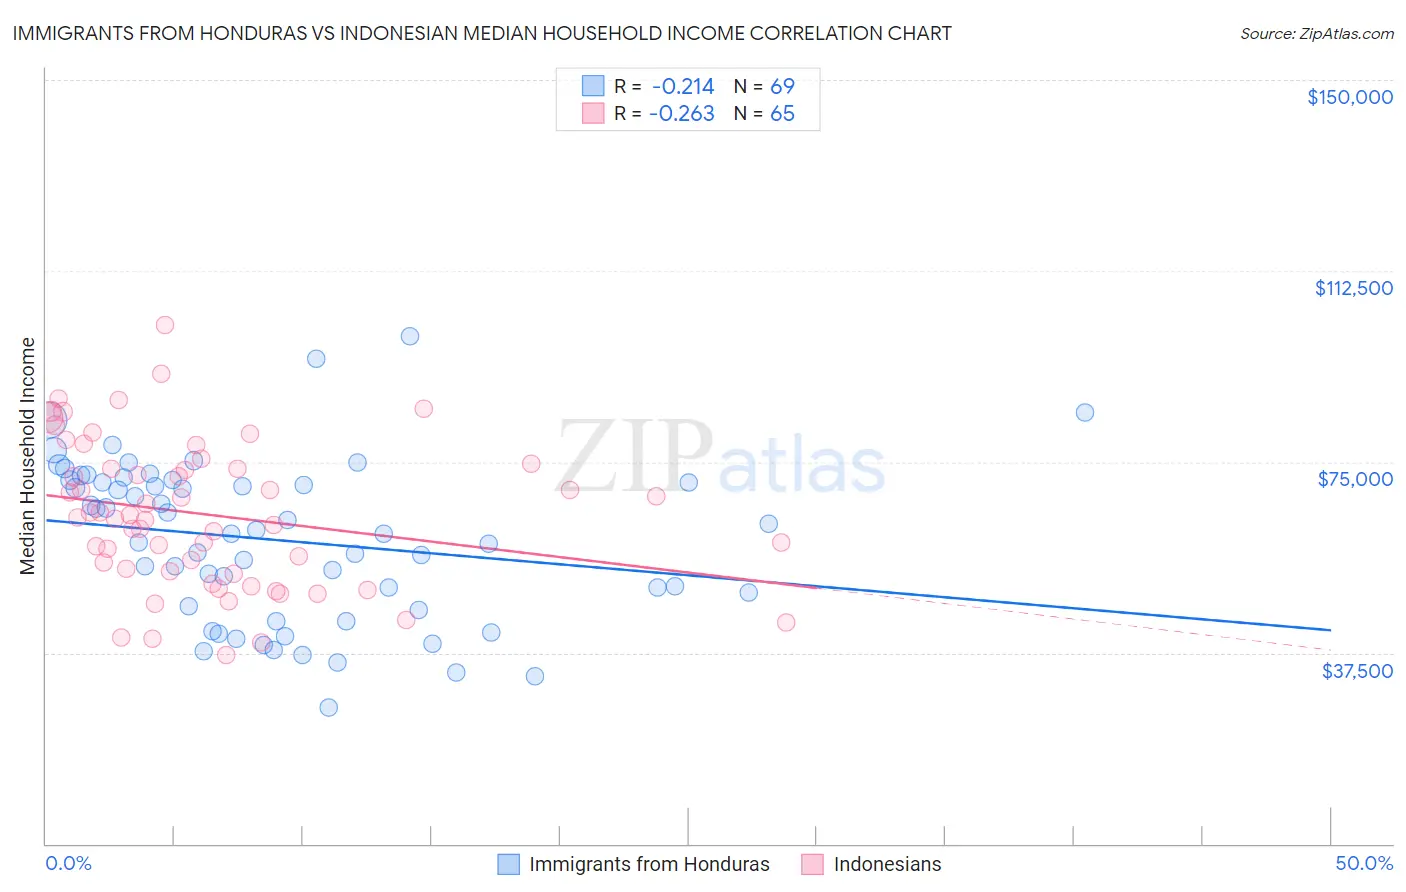 Immigrants from Honduras vs Indonesian Median Household Income